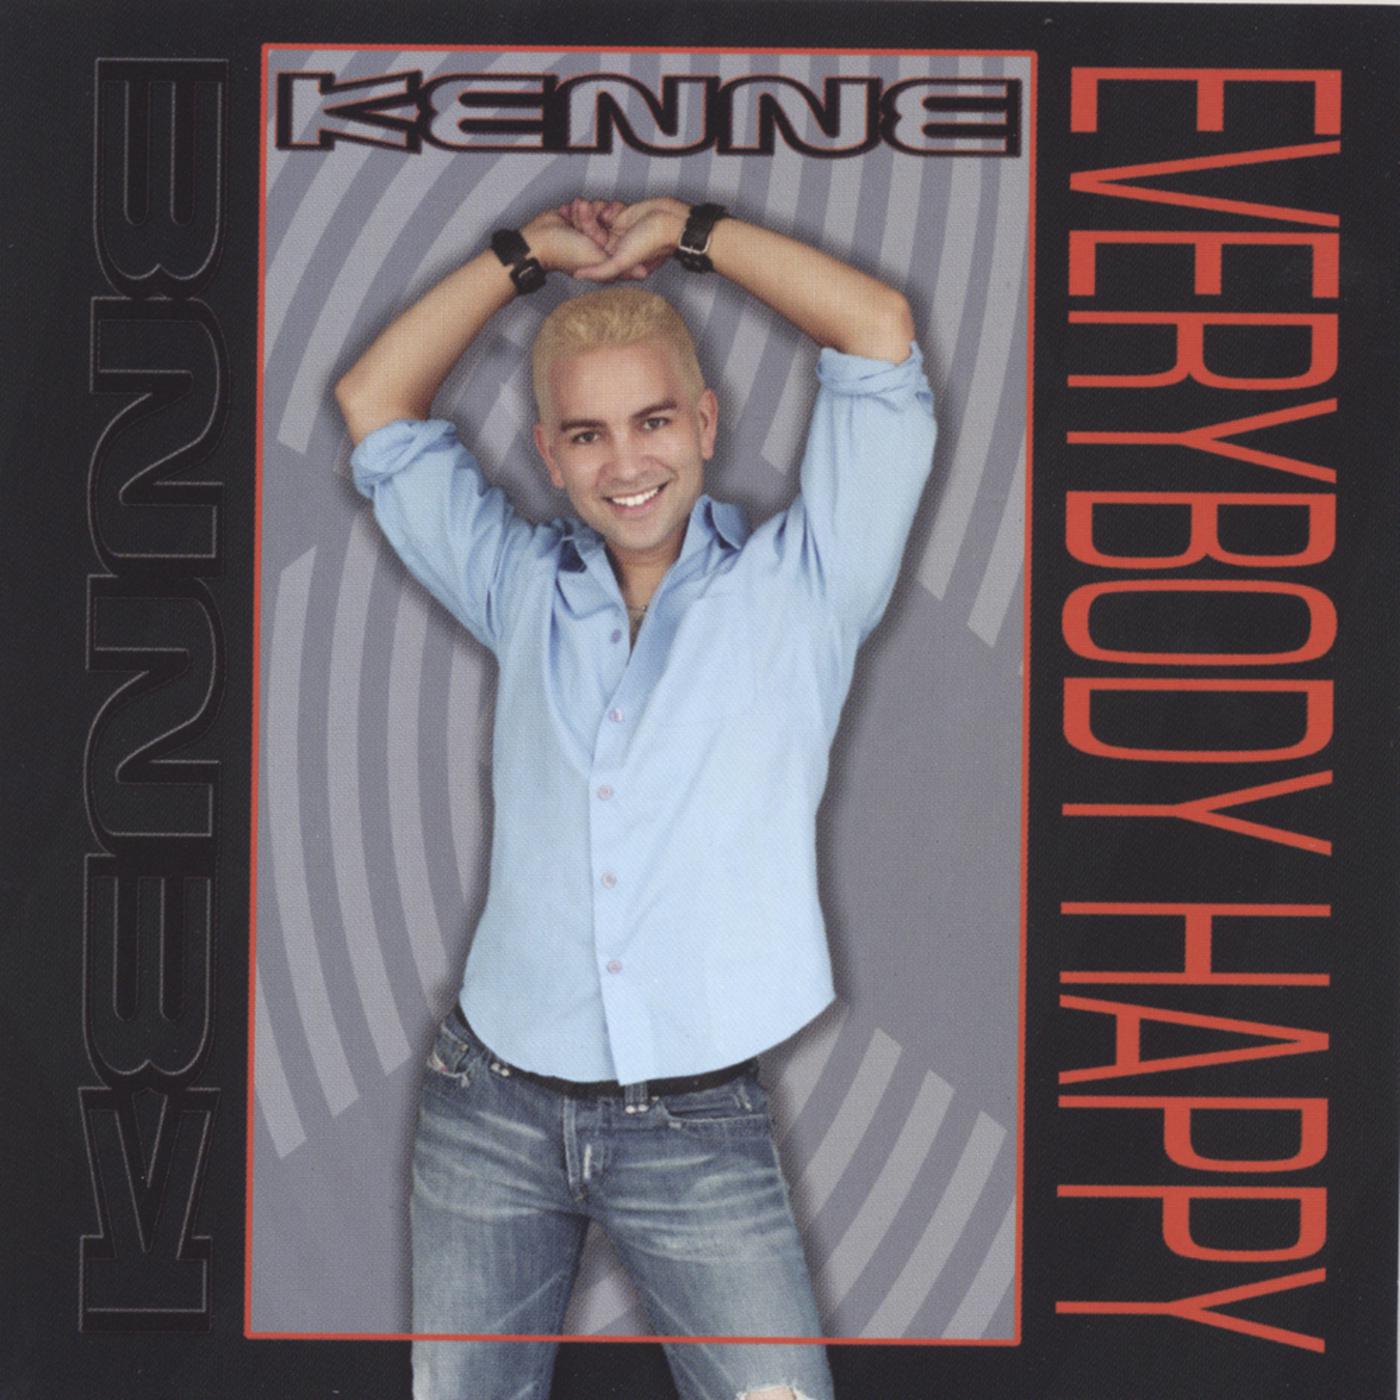 Kenne - Foundation Extended Club Mix